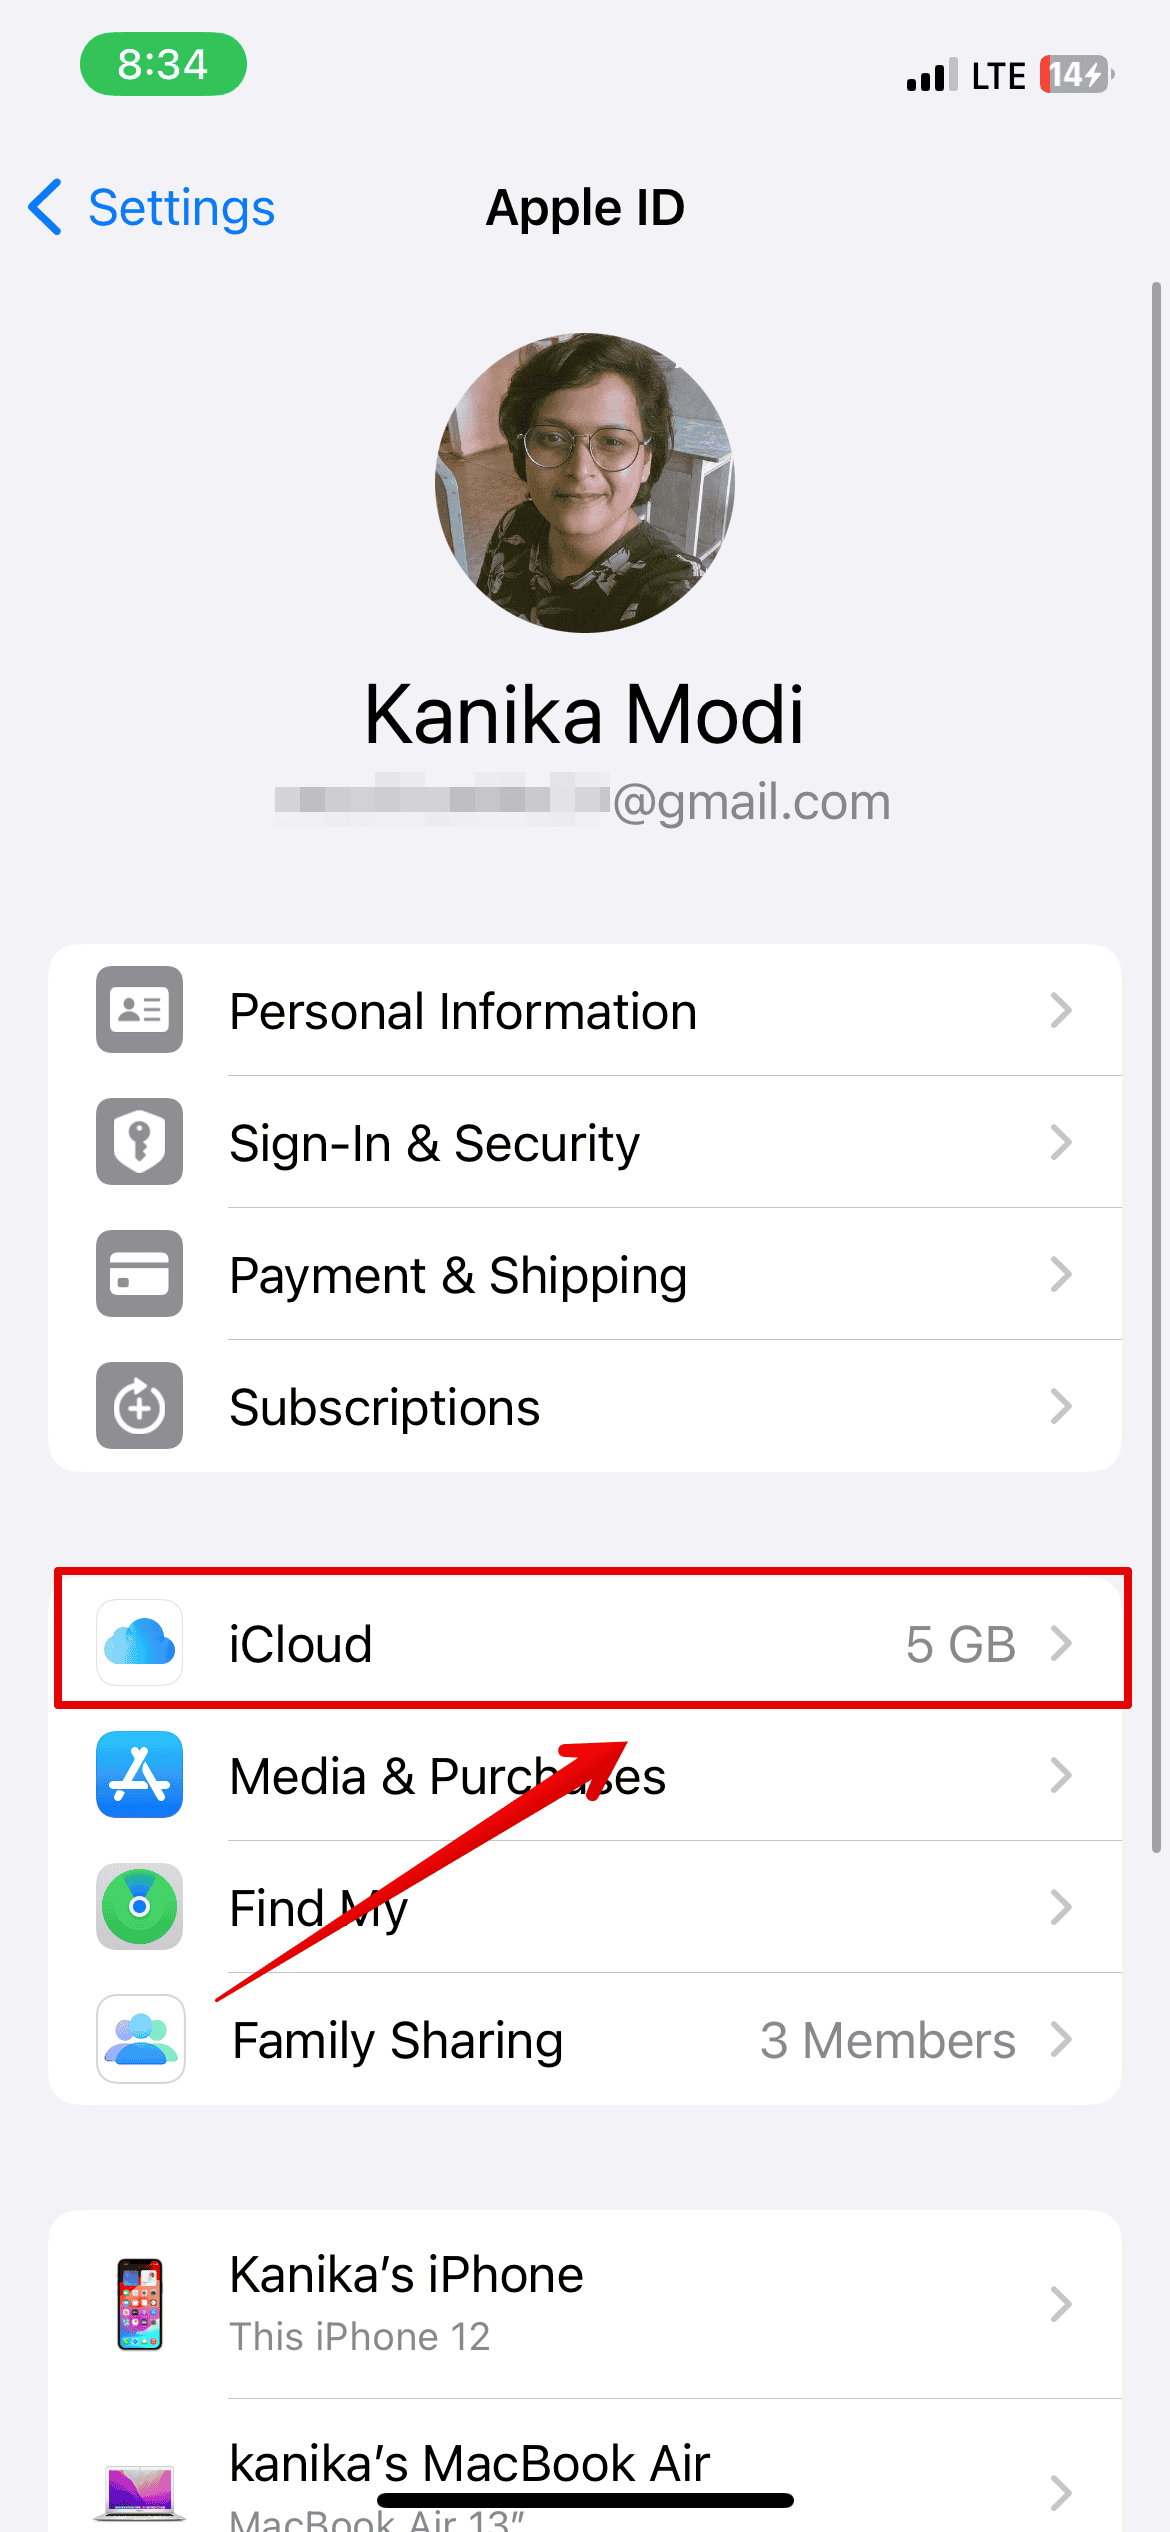 Select iCloud and open it